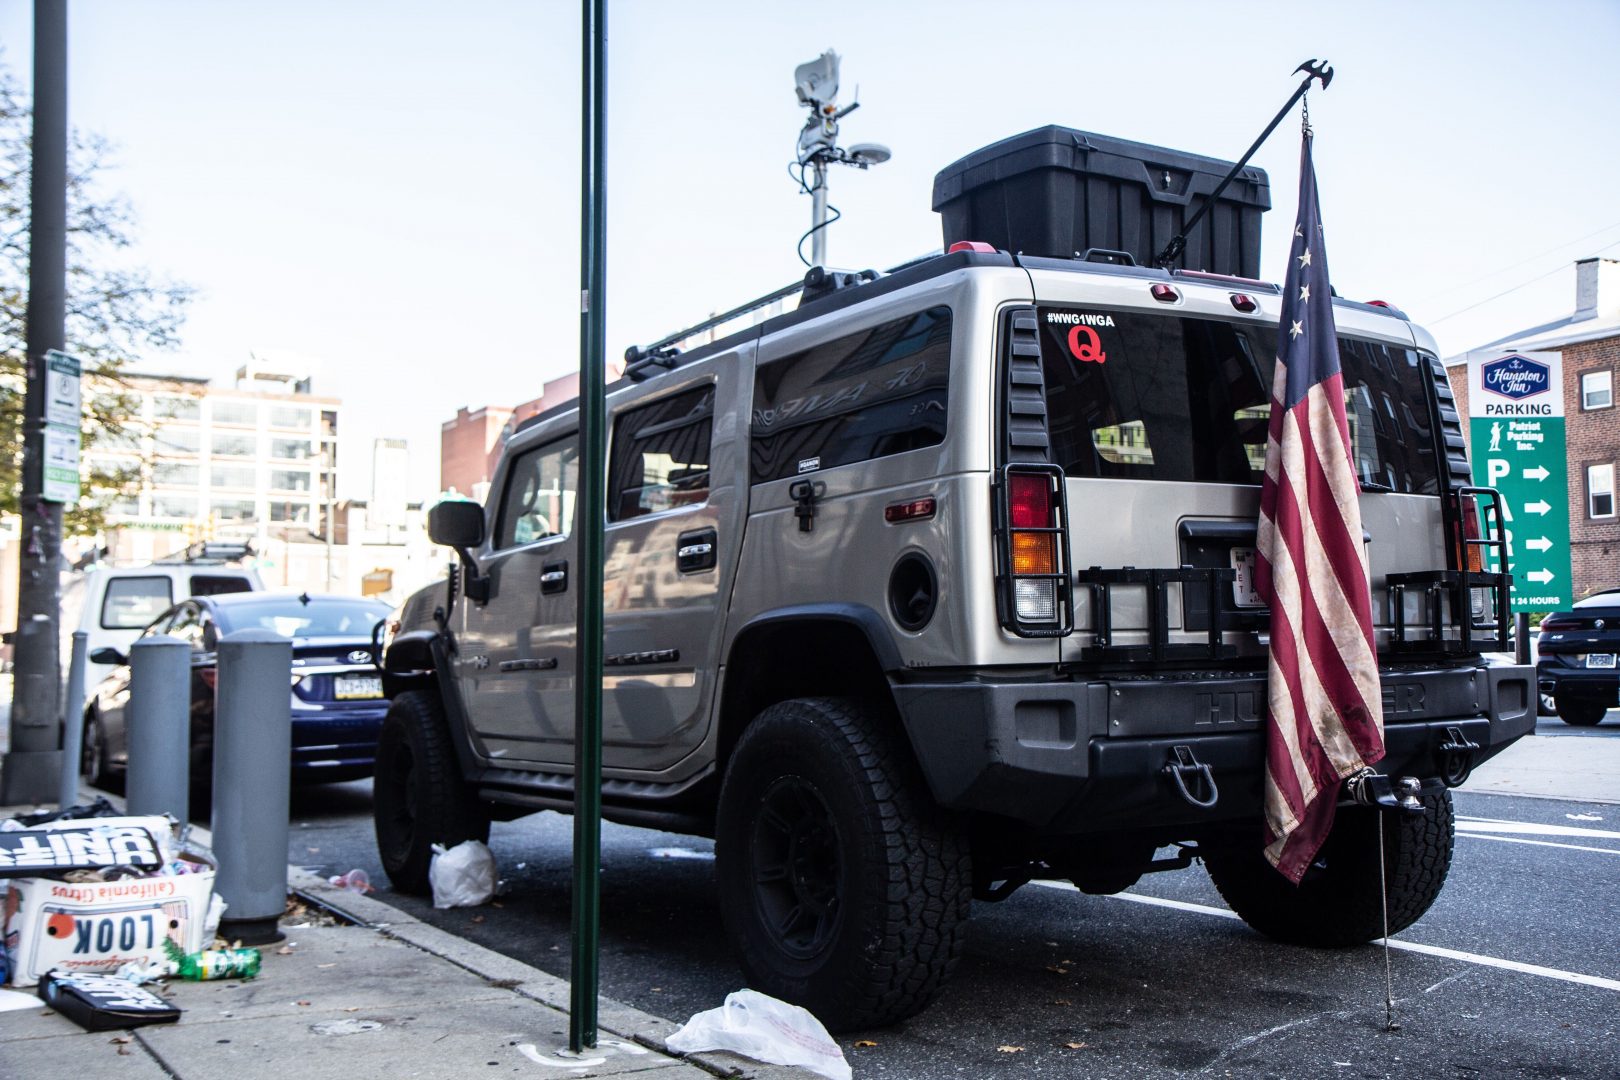 Philadelphia police say they are investigating an alleged plot to attack the Pennsylvania Convention Center in Philadelphia connected to a Hummer parked nearby. 